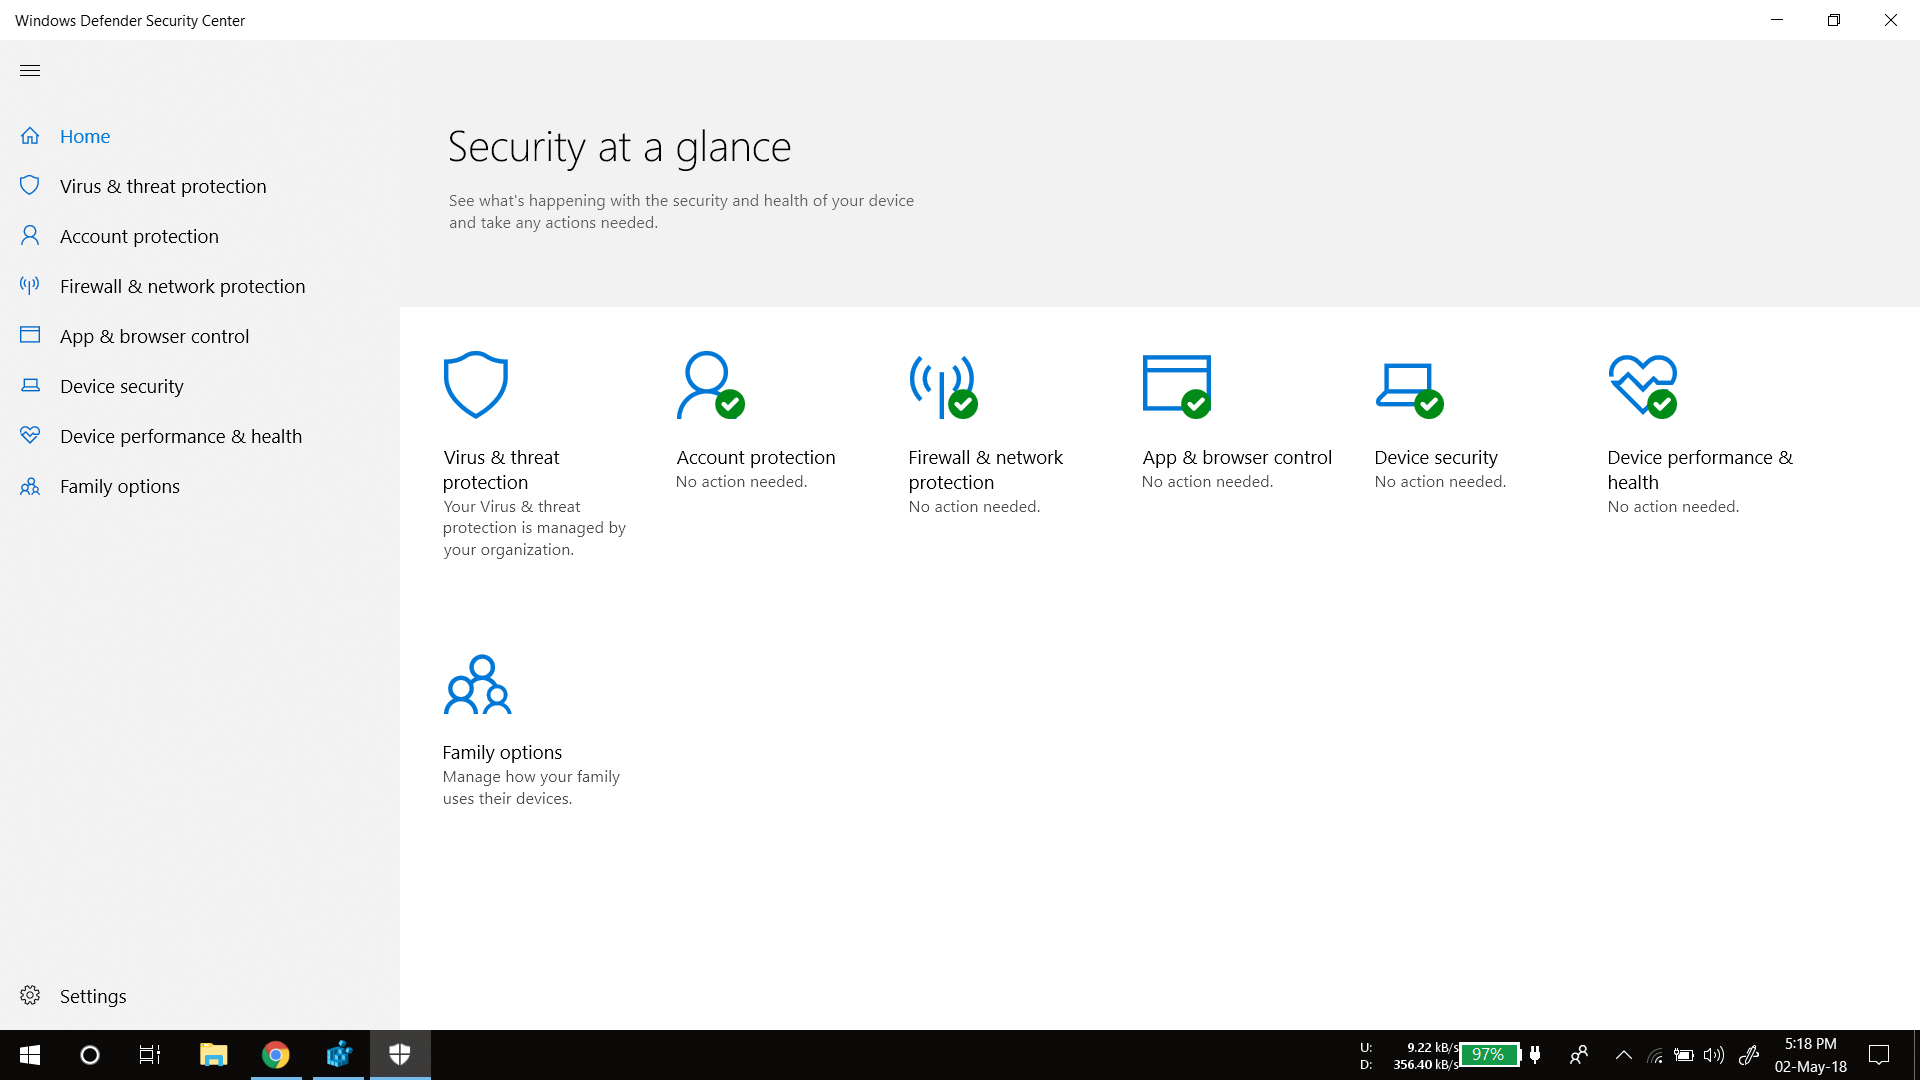 Windows defender: "Your Virus & threat protection is managed by your organization" 7716a124-dc9e-466d-a71e-36c5ce7897c9?upload=true.png